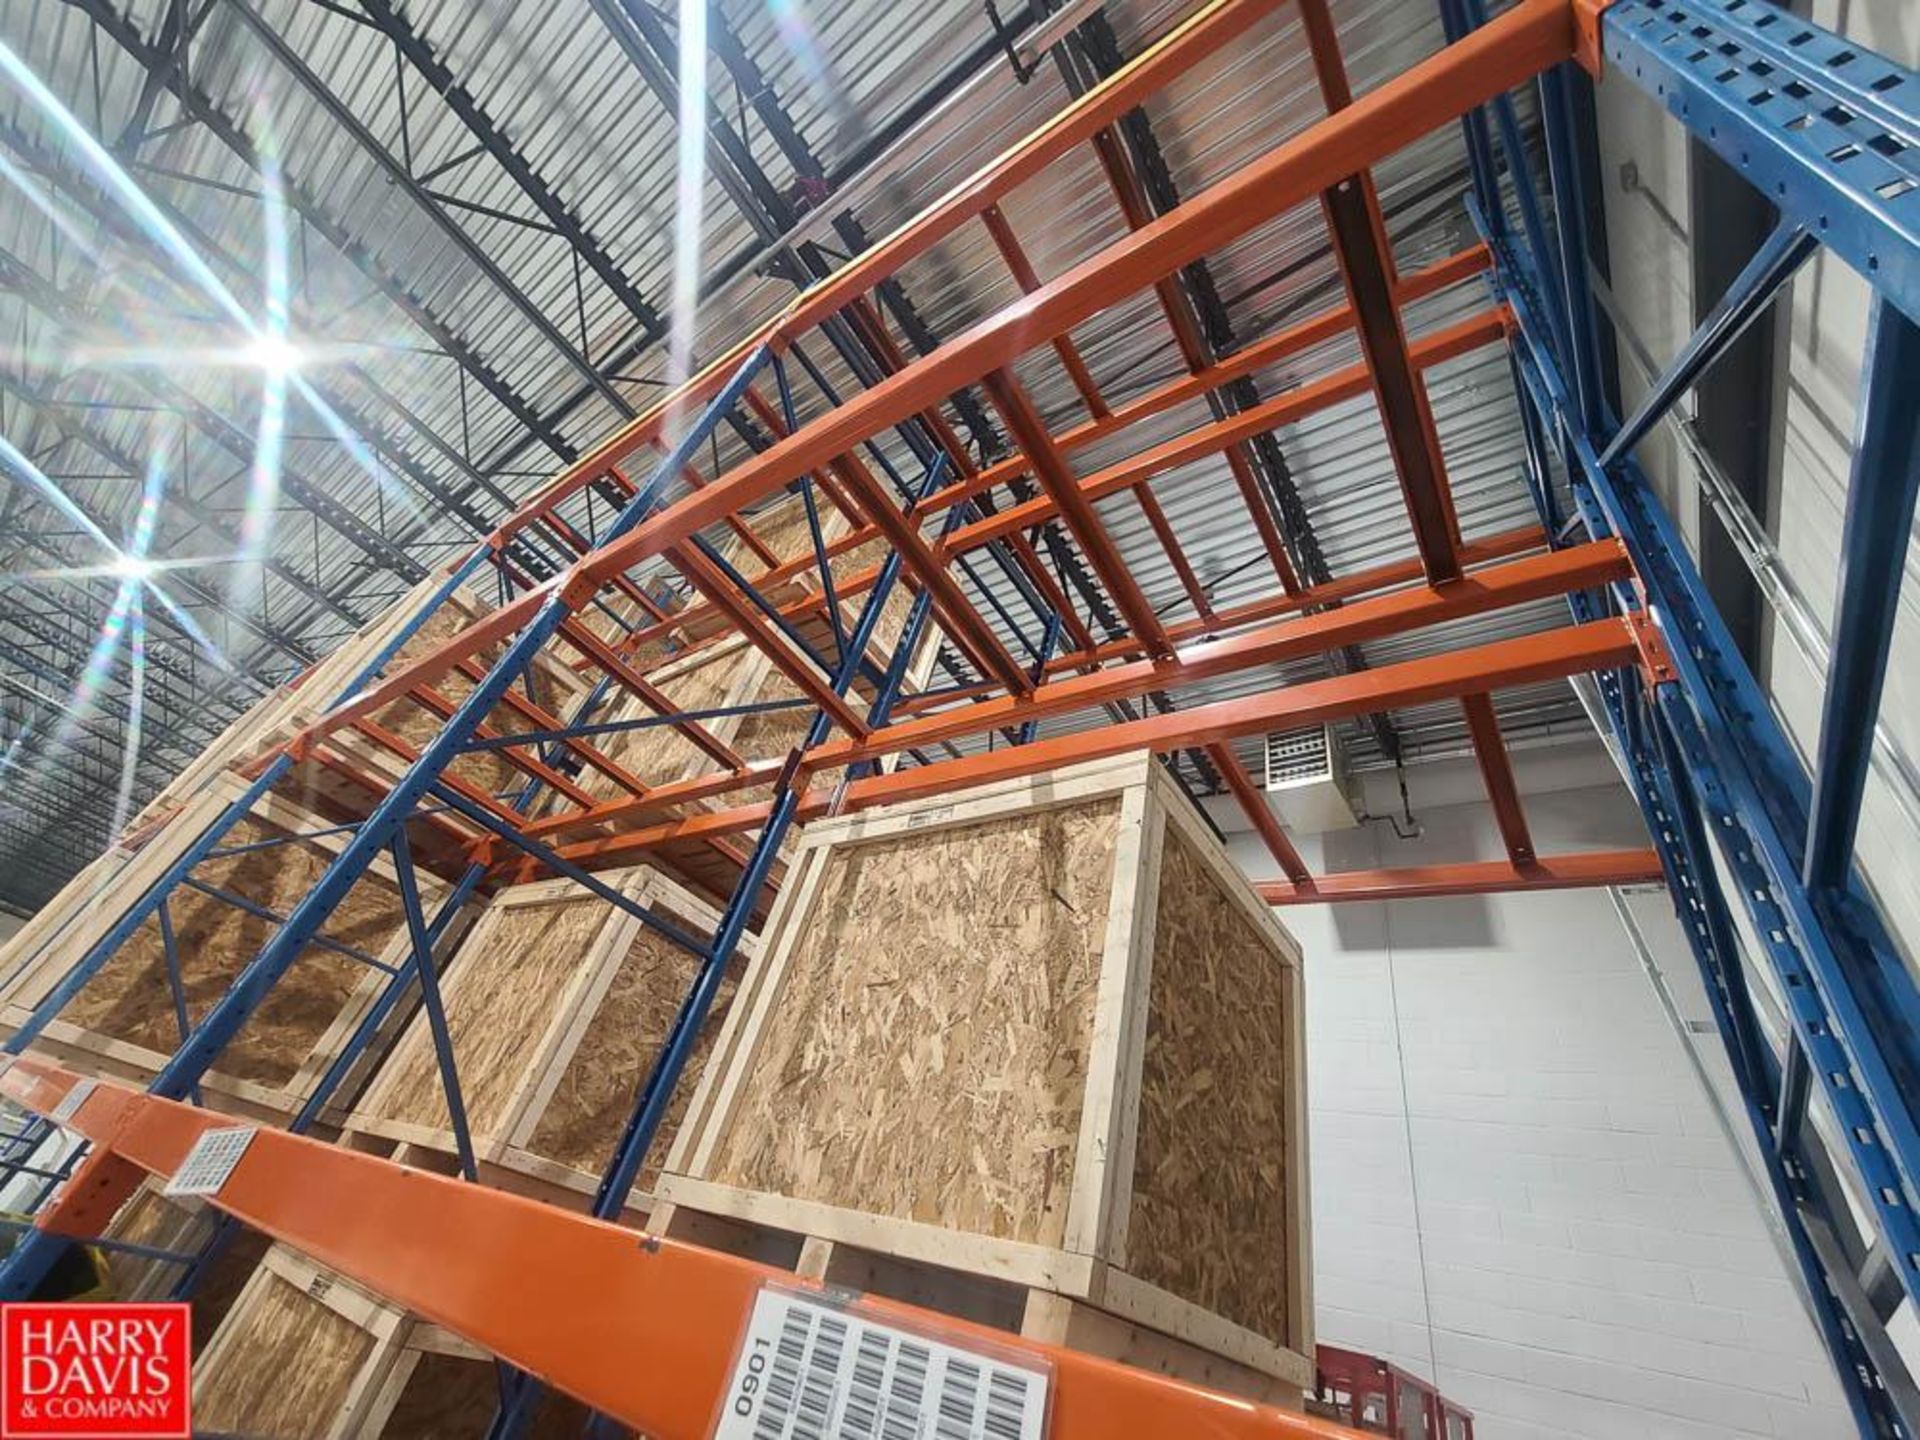 Section Pallet Racking: 42" x 8' x 18', Including: (10) Uprights, (64) Cross Beams and (128) Inserts - Image 3 of 3